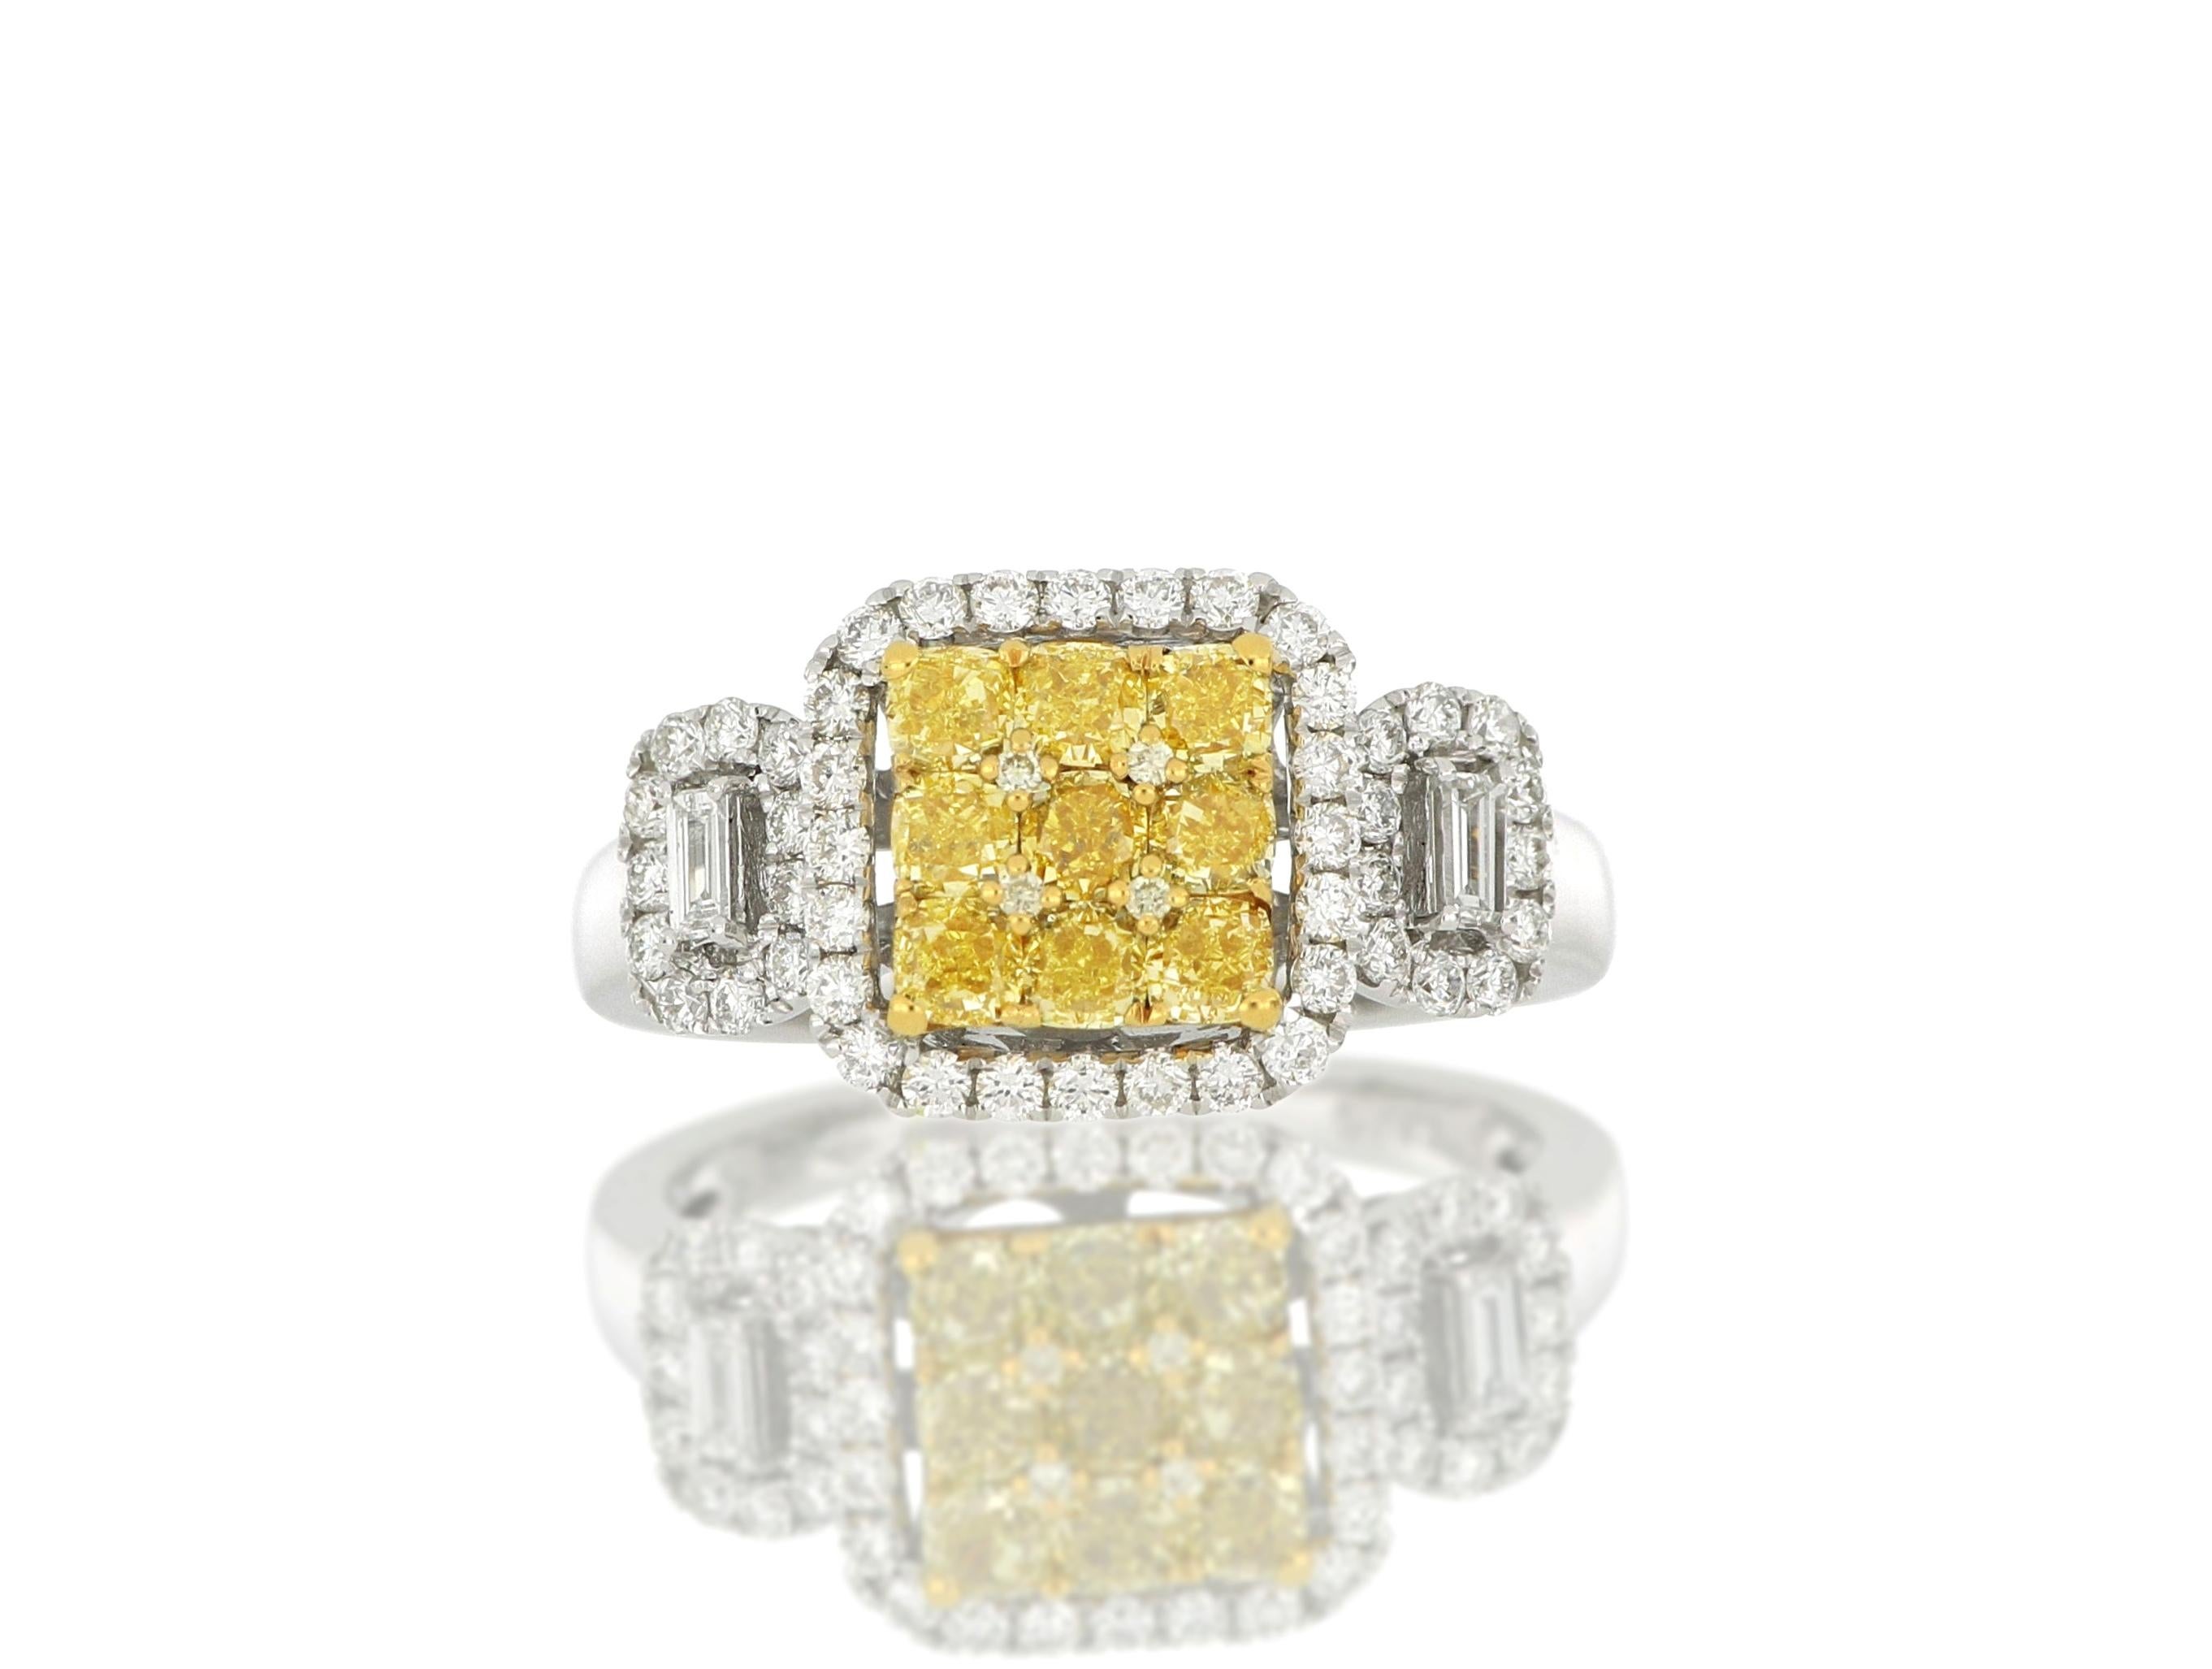 A diamond ring, set with brilliant-cut natural fancy yellow diamonds weighing approximately 1.01 carats, flanked by brilliant-cut diamonds and accented by trapeze-shaped diamonds weighing approximately 0.56 carats in total, mounted in 18 Karat white